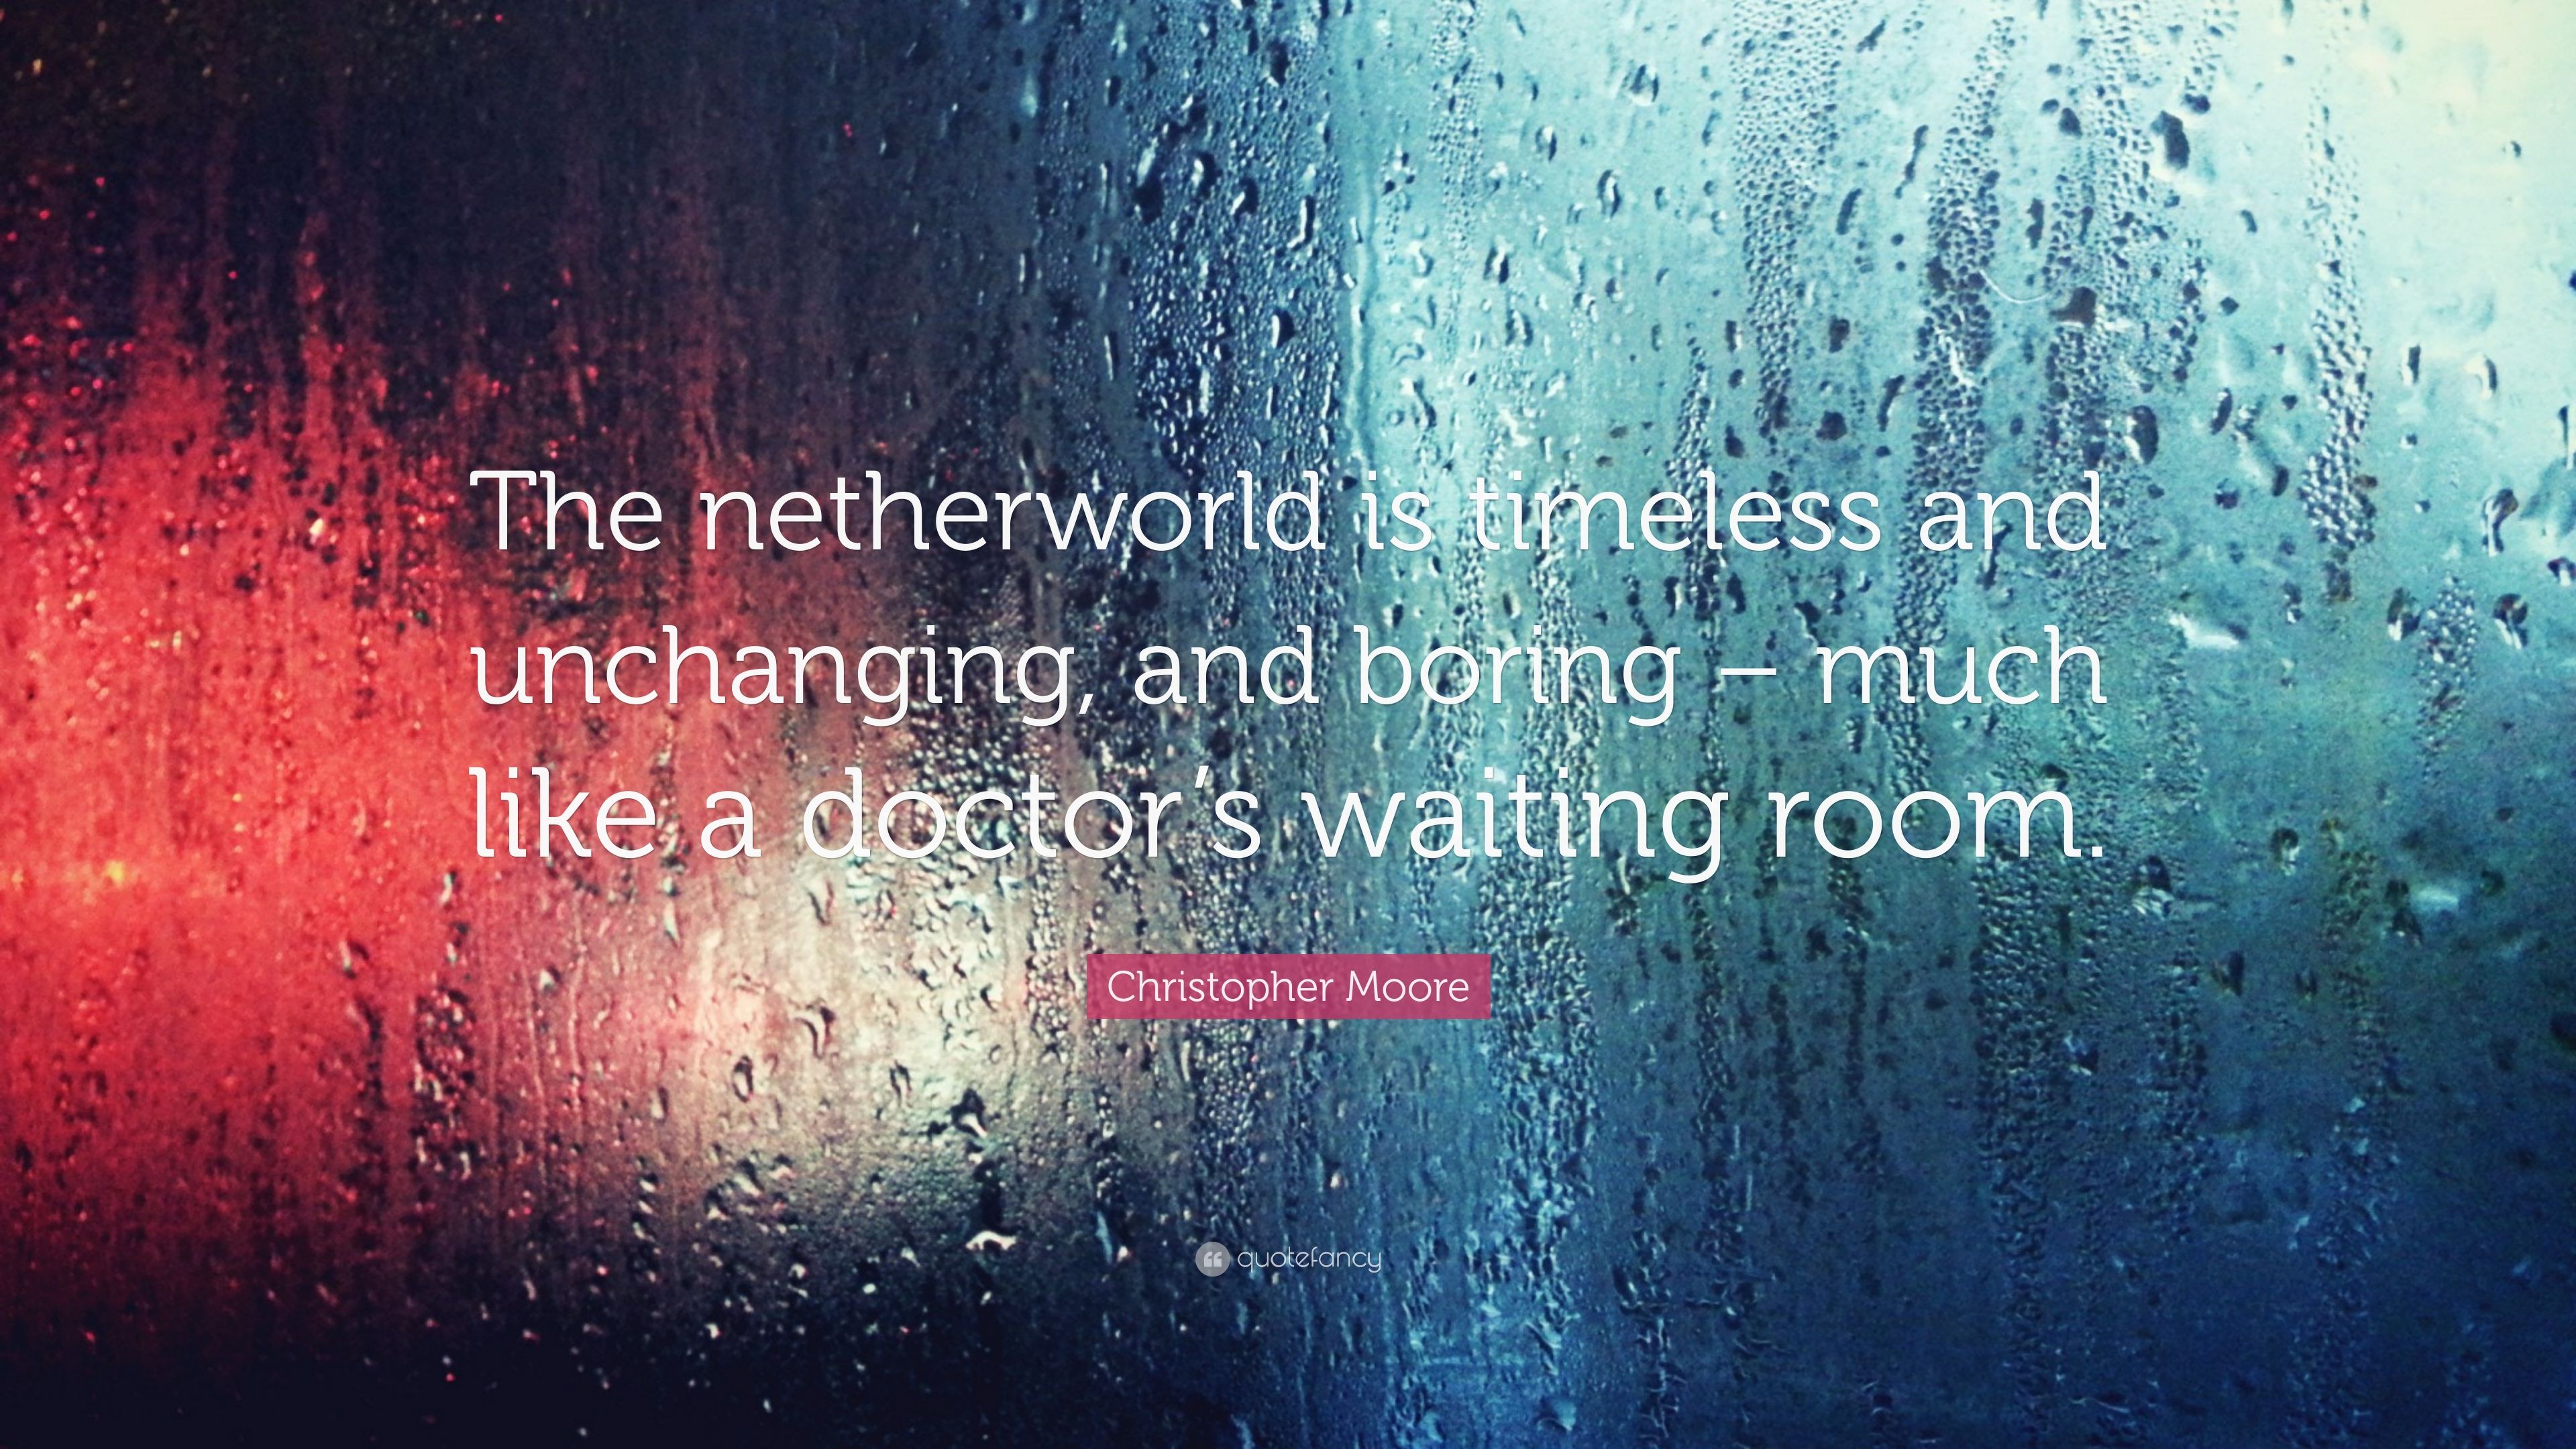 Christopher Moore Quote: “The netherworld is timeless